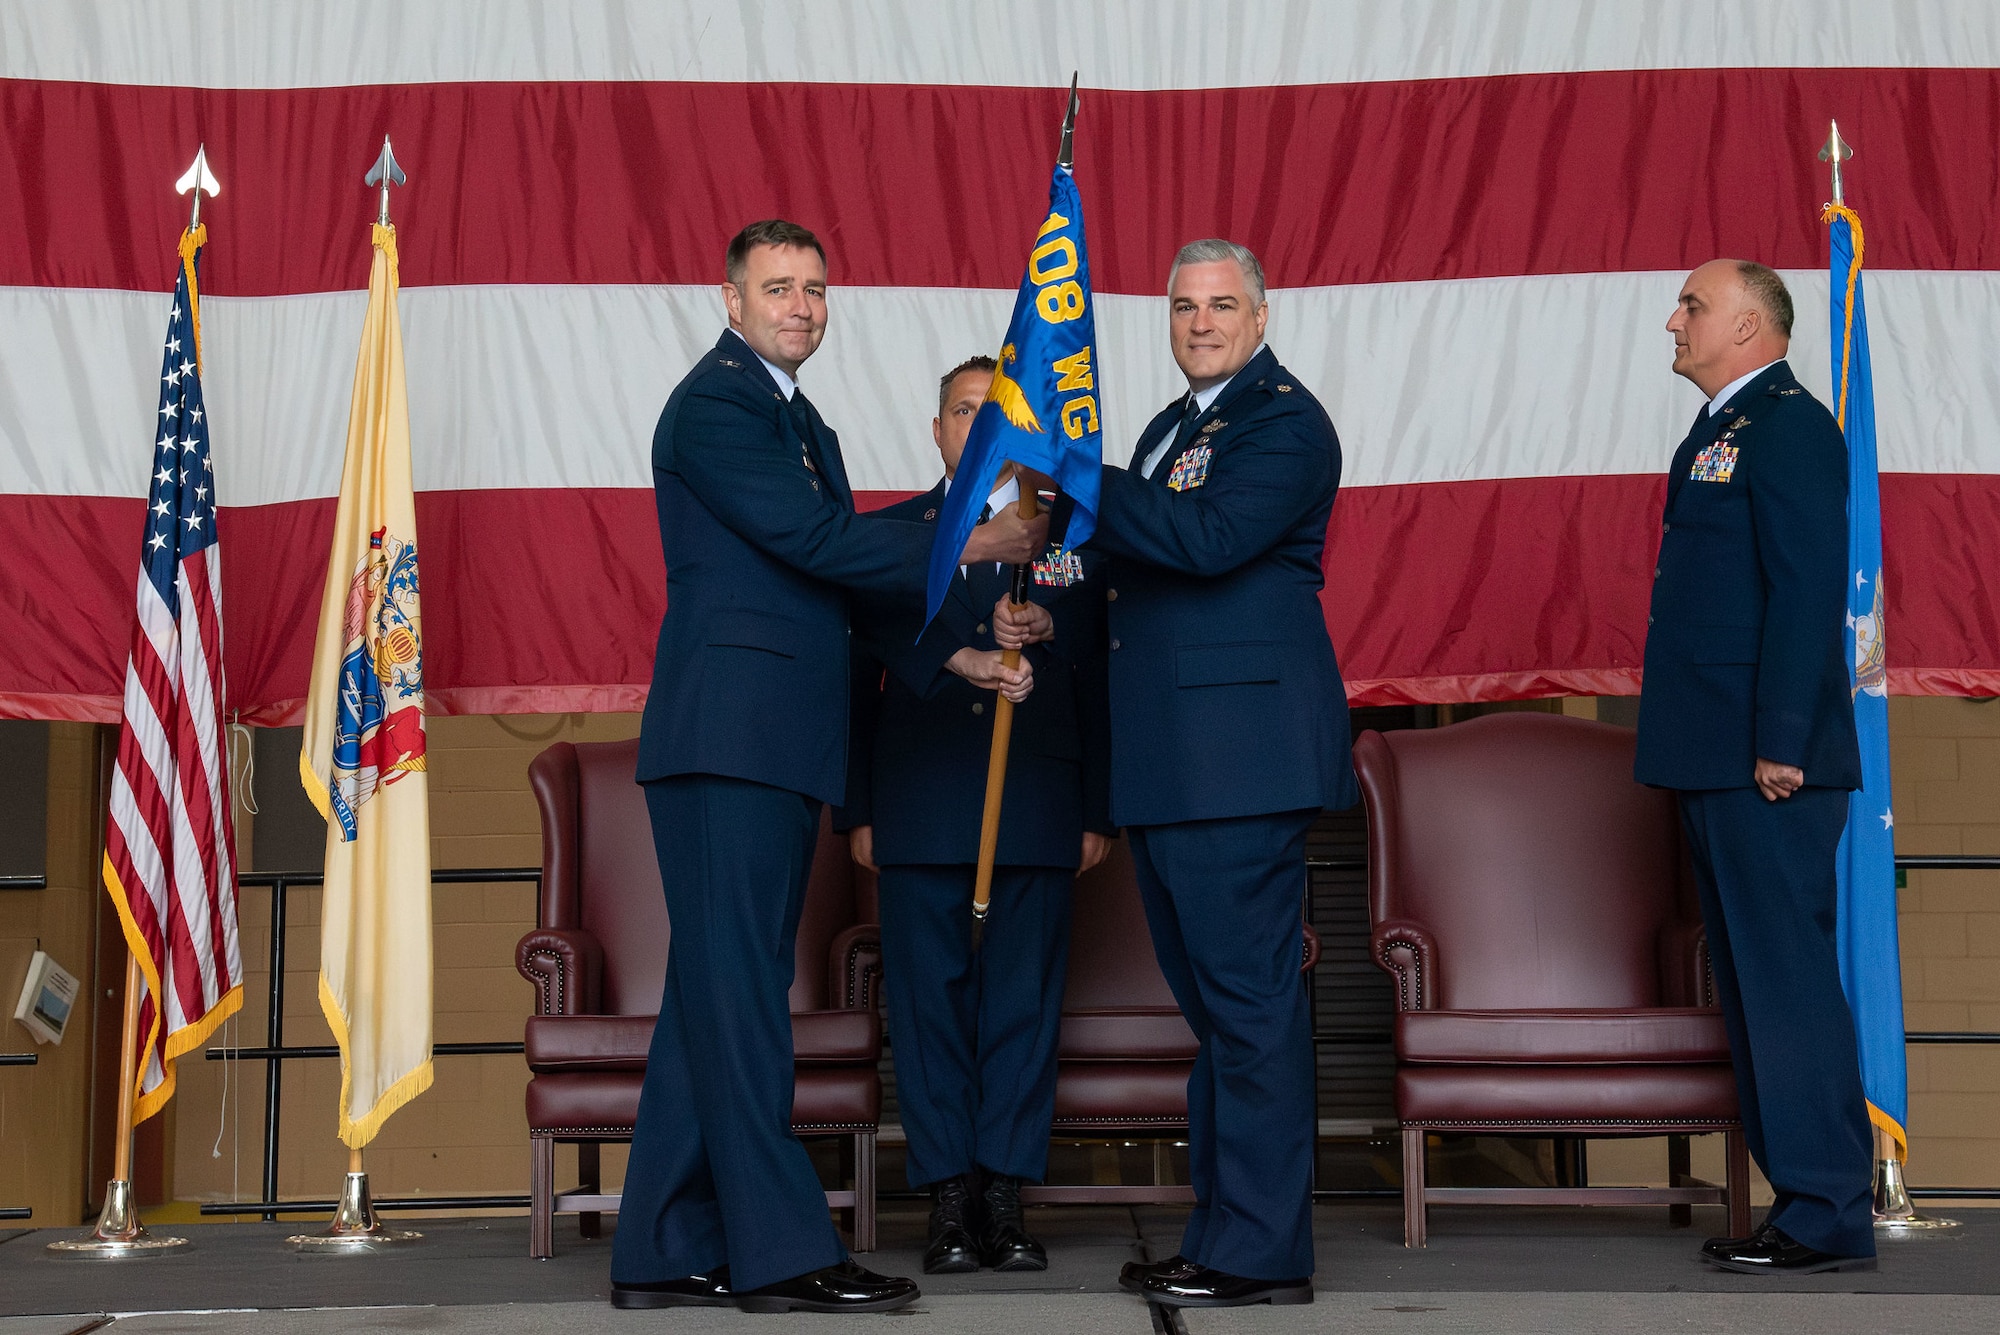 Change of command and retirement ceremony